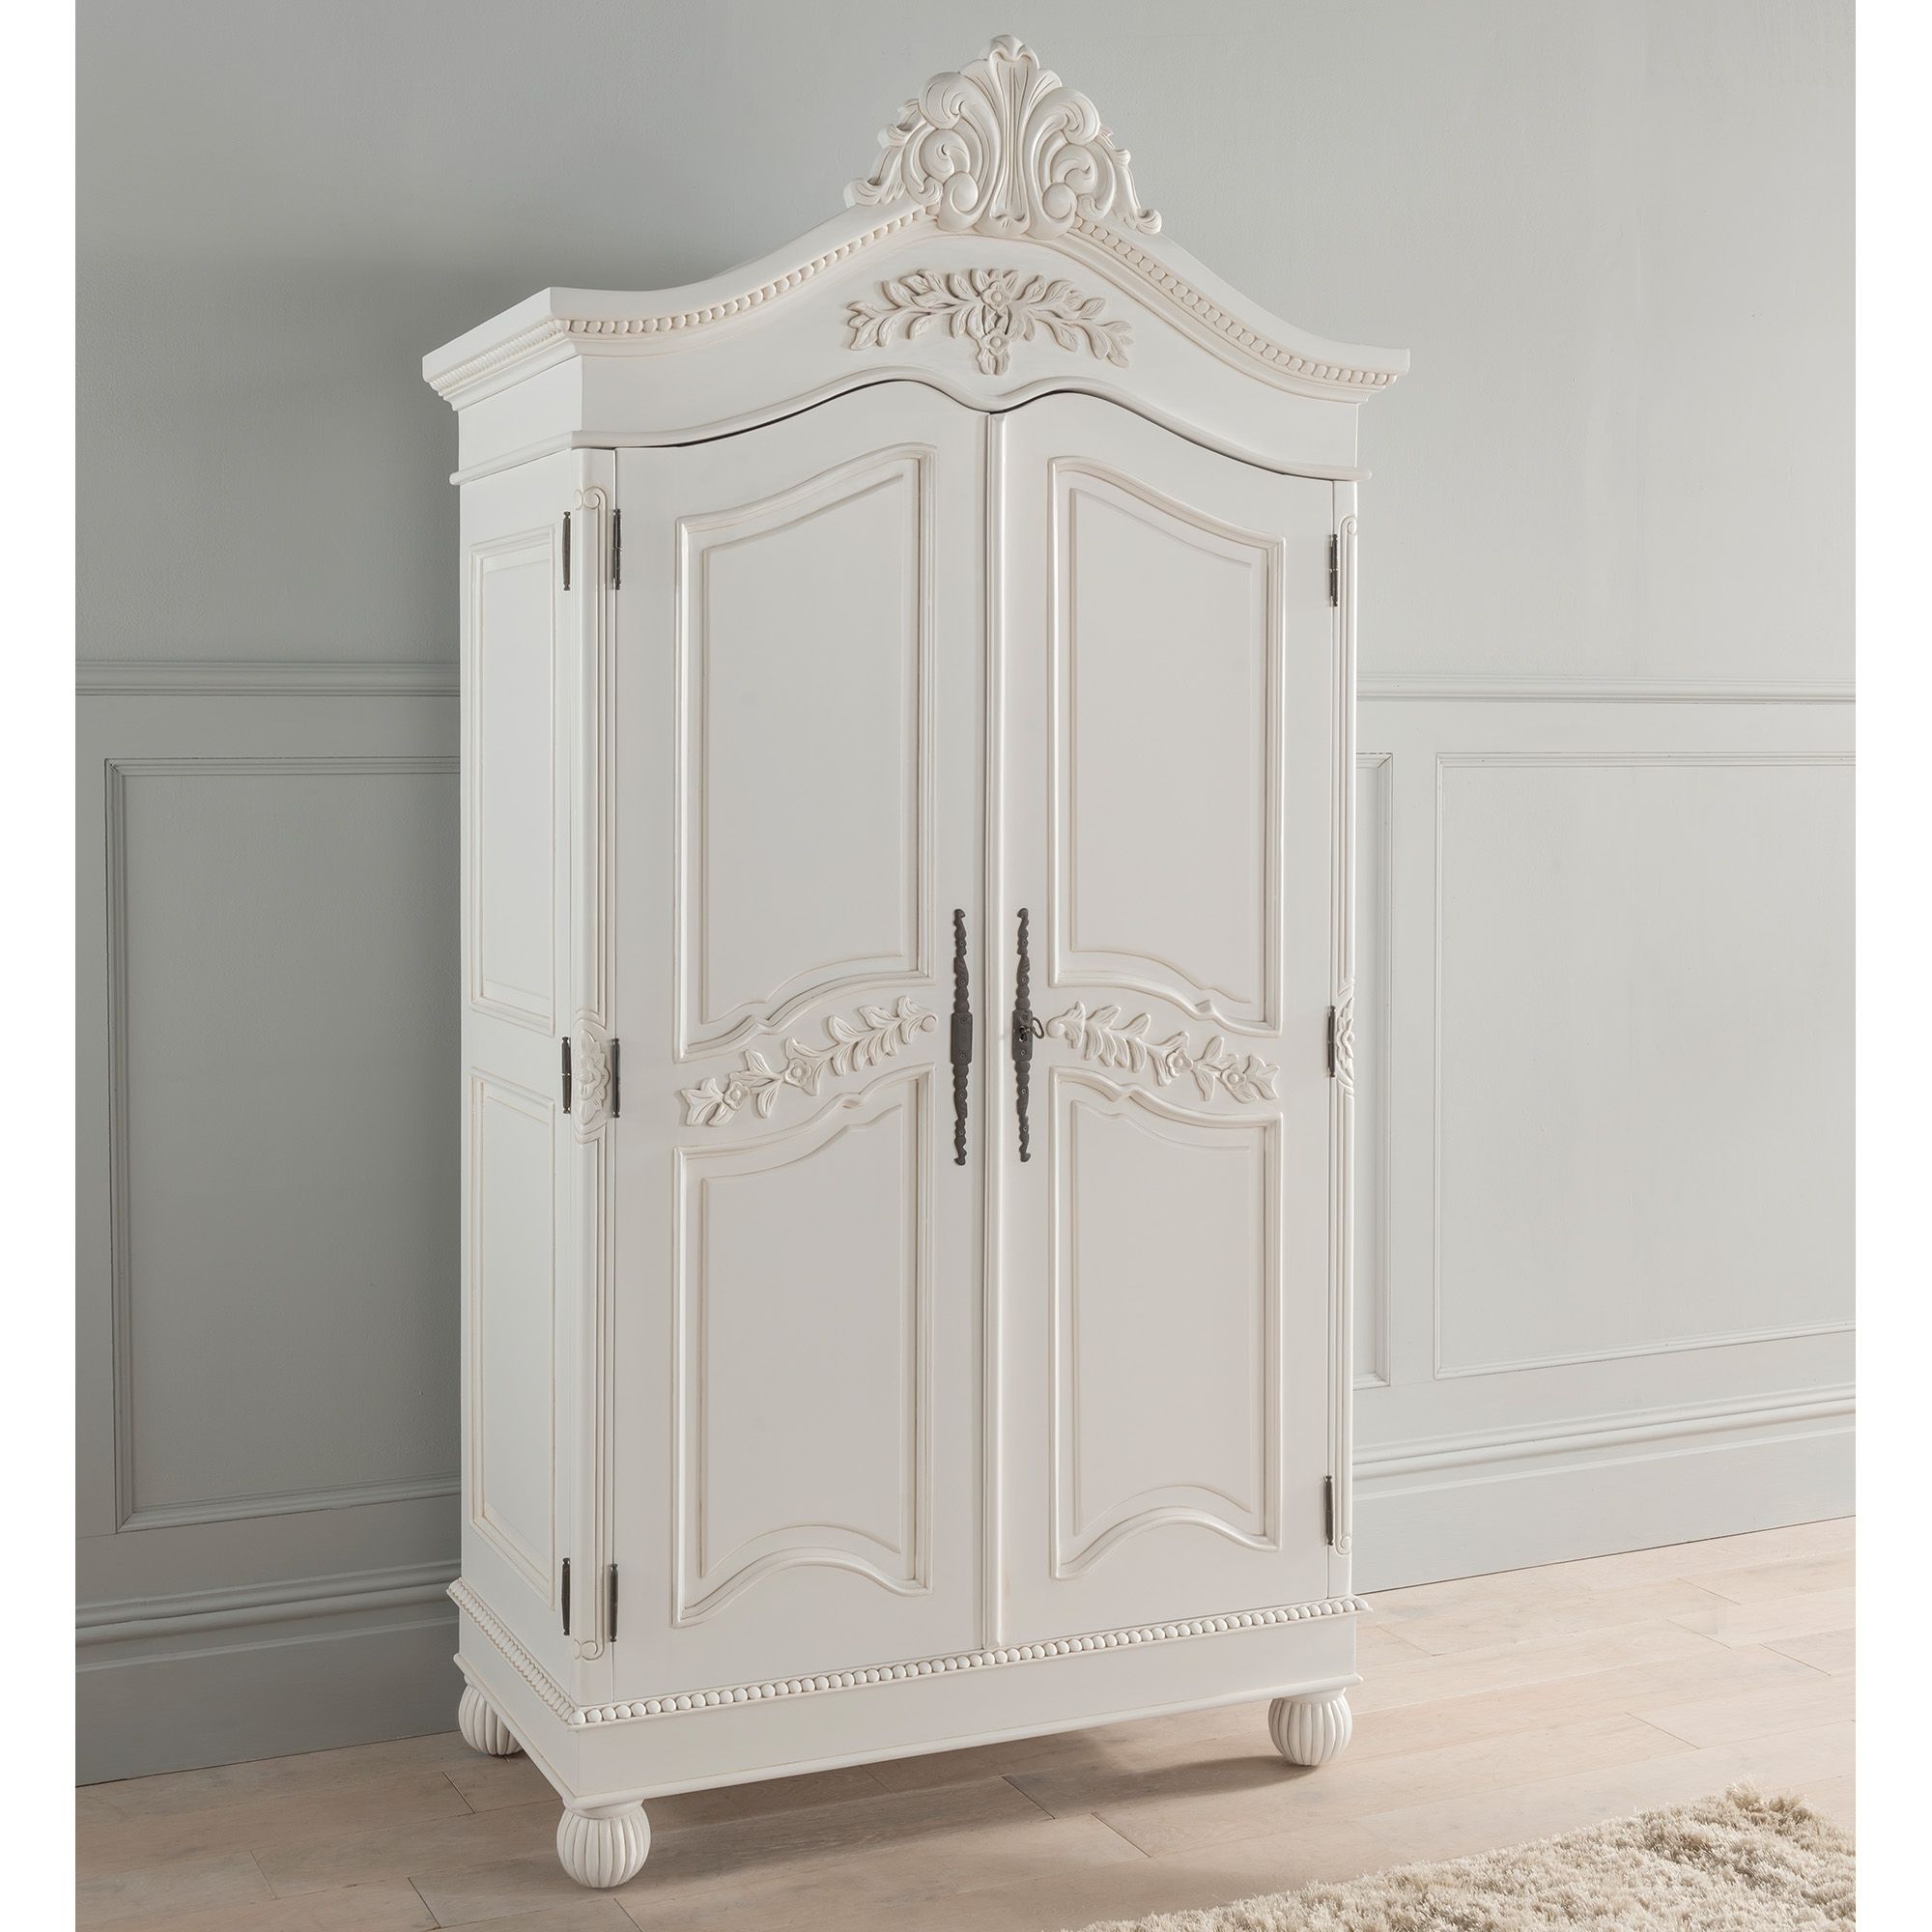 Antique French Style Wardrobe | Shabby Chic Bedroom Furniture In Shabby Chic Wardrobes (Gallery 6 of 20)